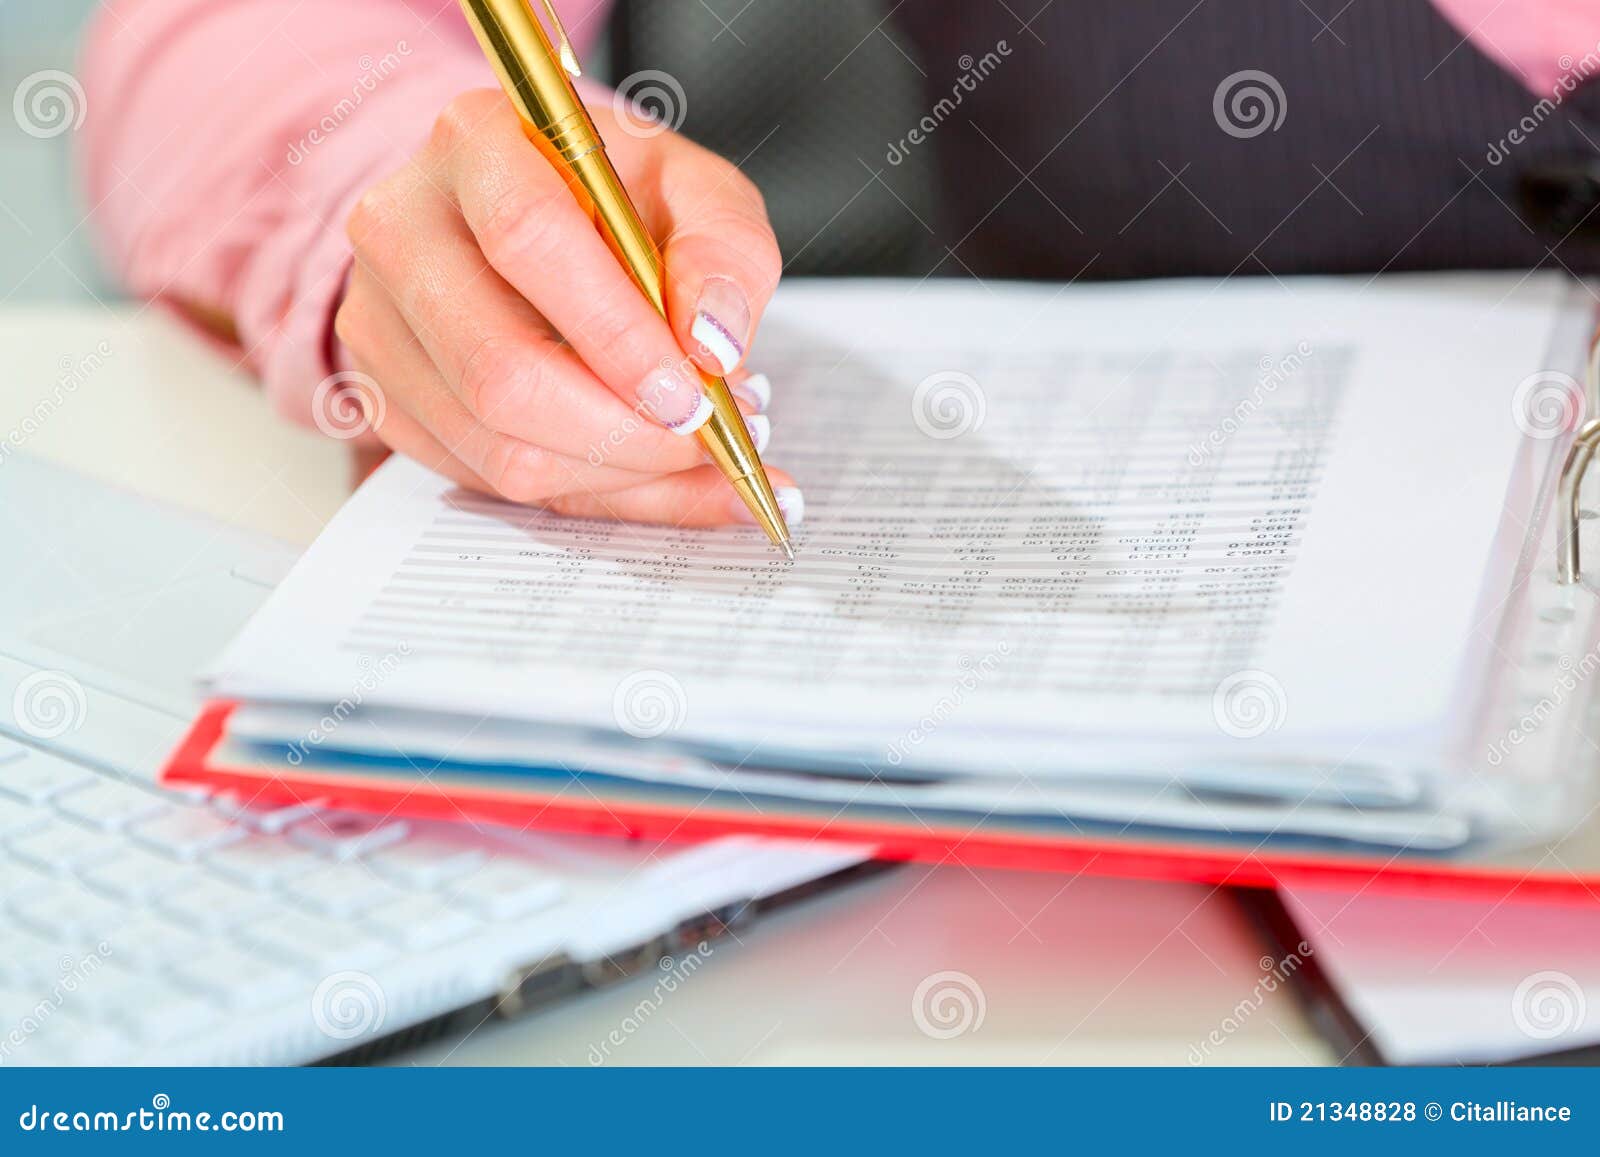 Closeup on Female Hand Writing in Document Stock Photo - Image of ...